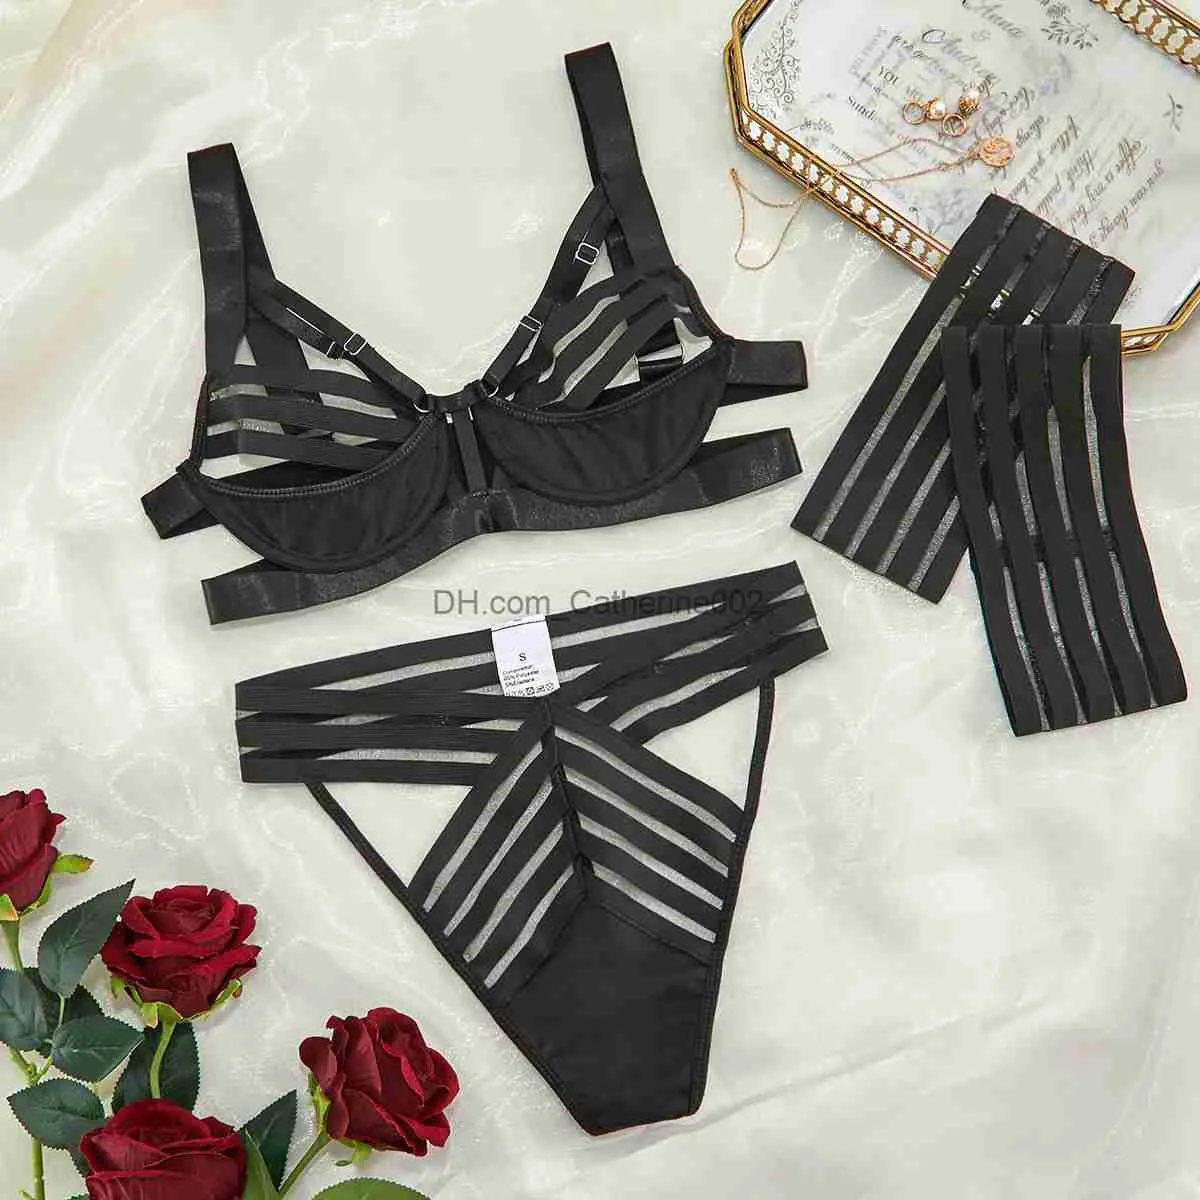 Black Exotic Bandage Lingerie Set With Cut Out Bra And Transparent Detail  Sexy Bra And Underwear Set For Women T231027 From Catherine002, $2.48